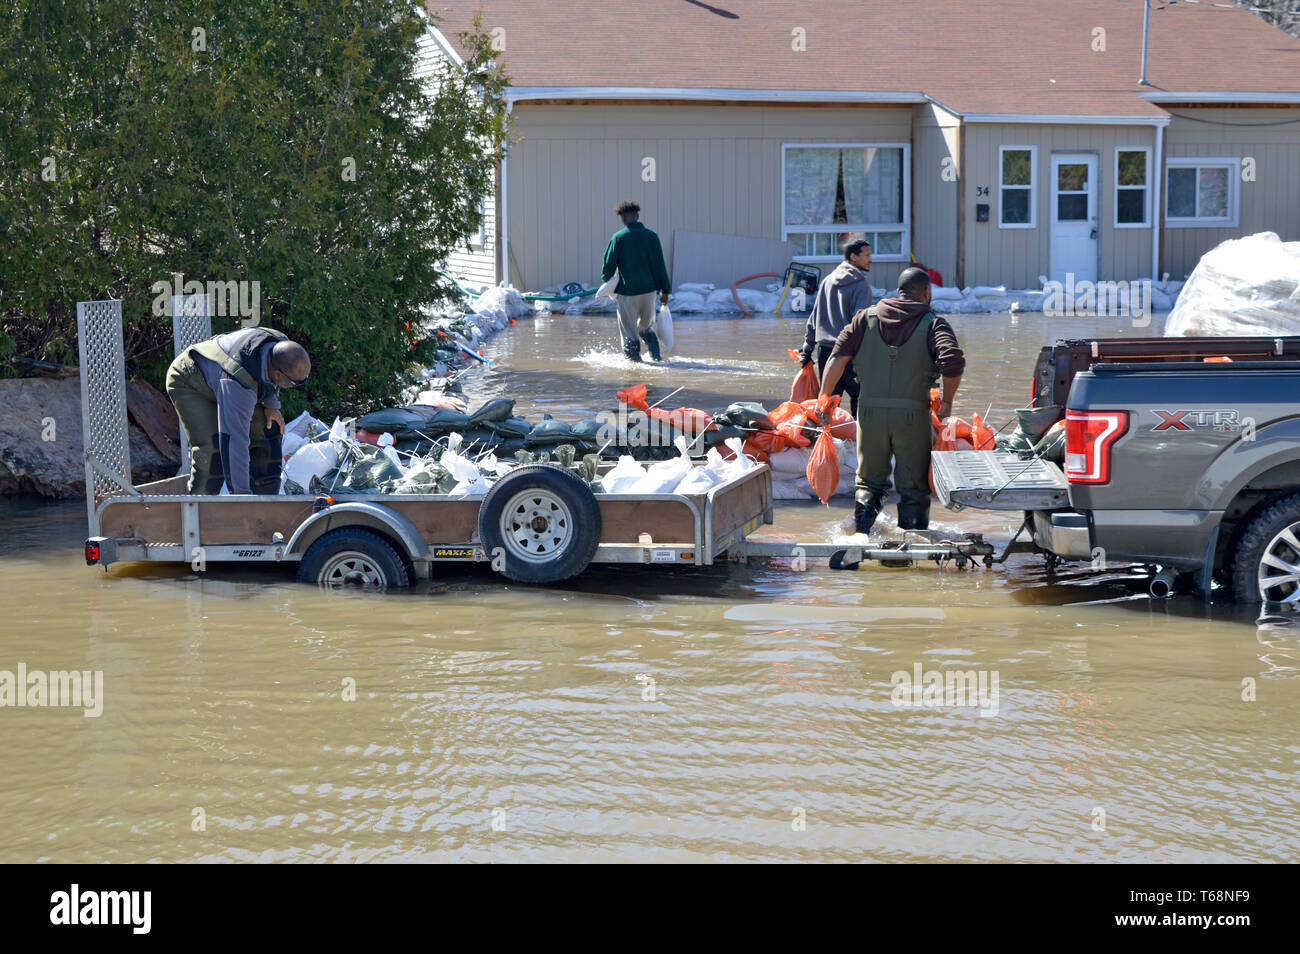 Volunteers help load and unload sandbags to protect a home from rising flood waters in Gatineau (near Ottawa) Canada, during the Spring floods of 2019. Stock Photo